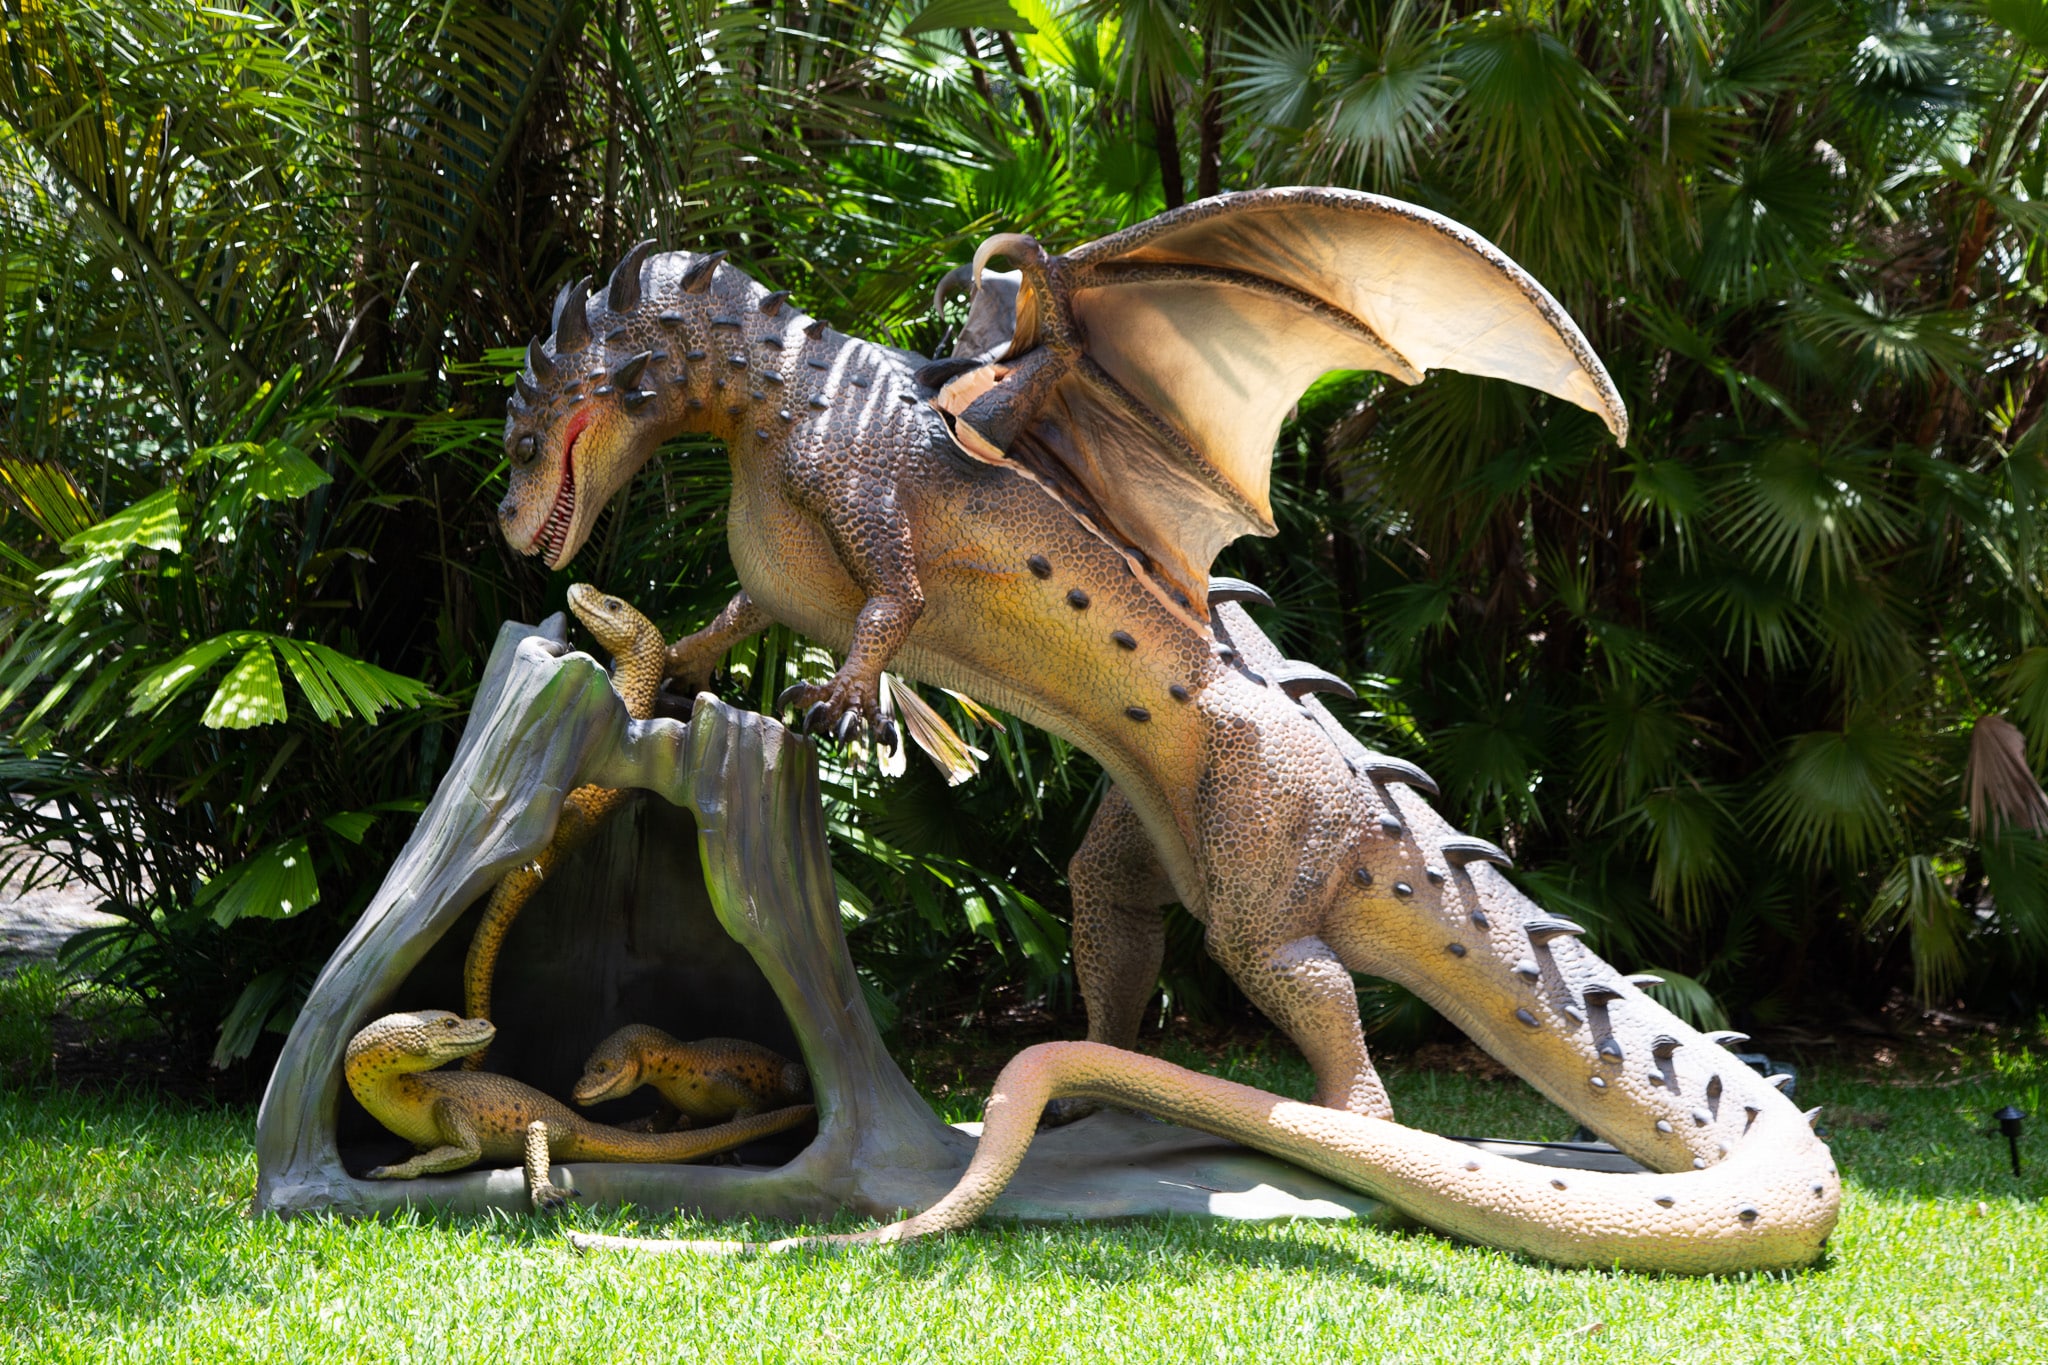 Dragons and Mythical Creatures at Fairchild